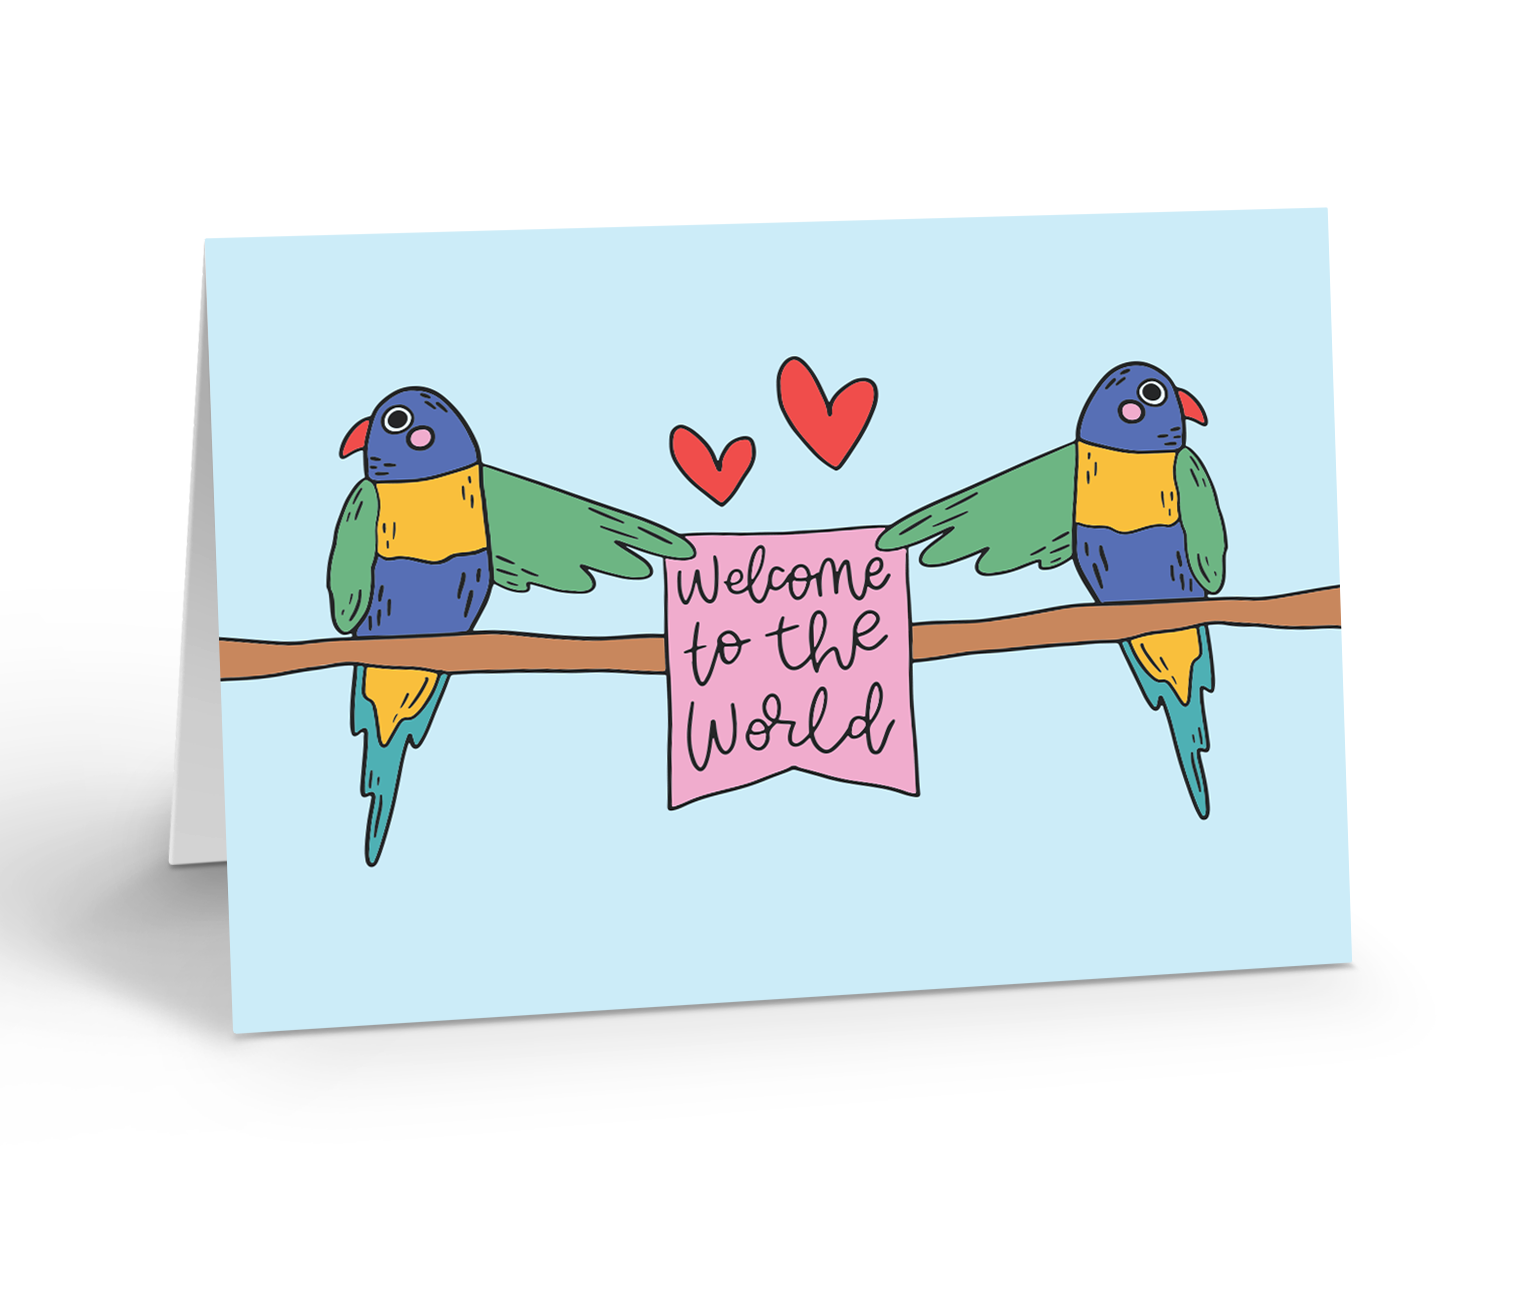 Two rainbow lorikeets holding up a sign welcome to the world greeting card